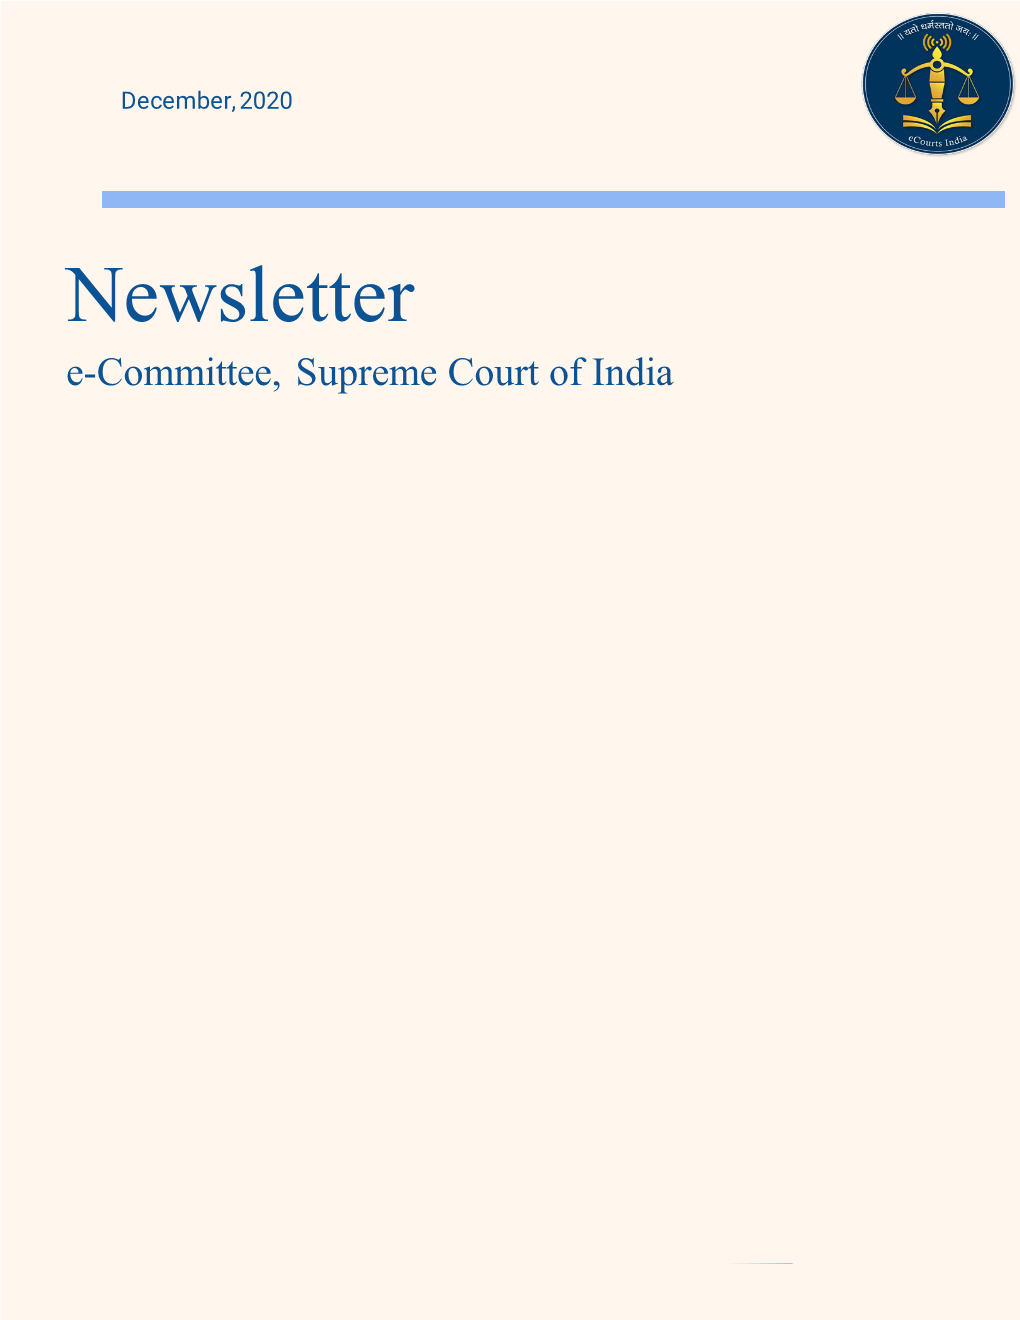 Newsletter E-Committee, Supreme Court of India